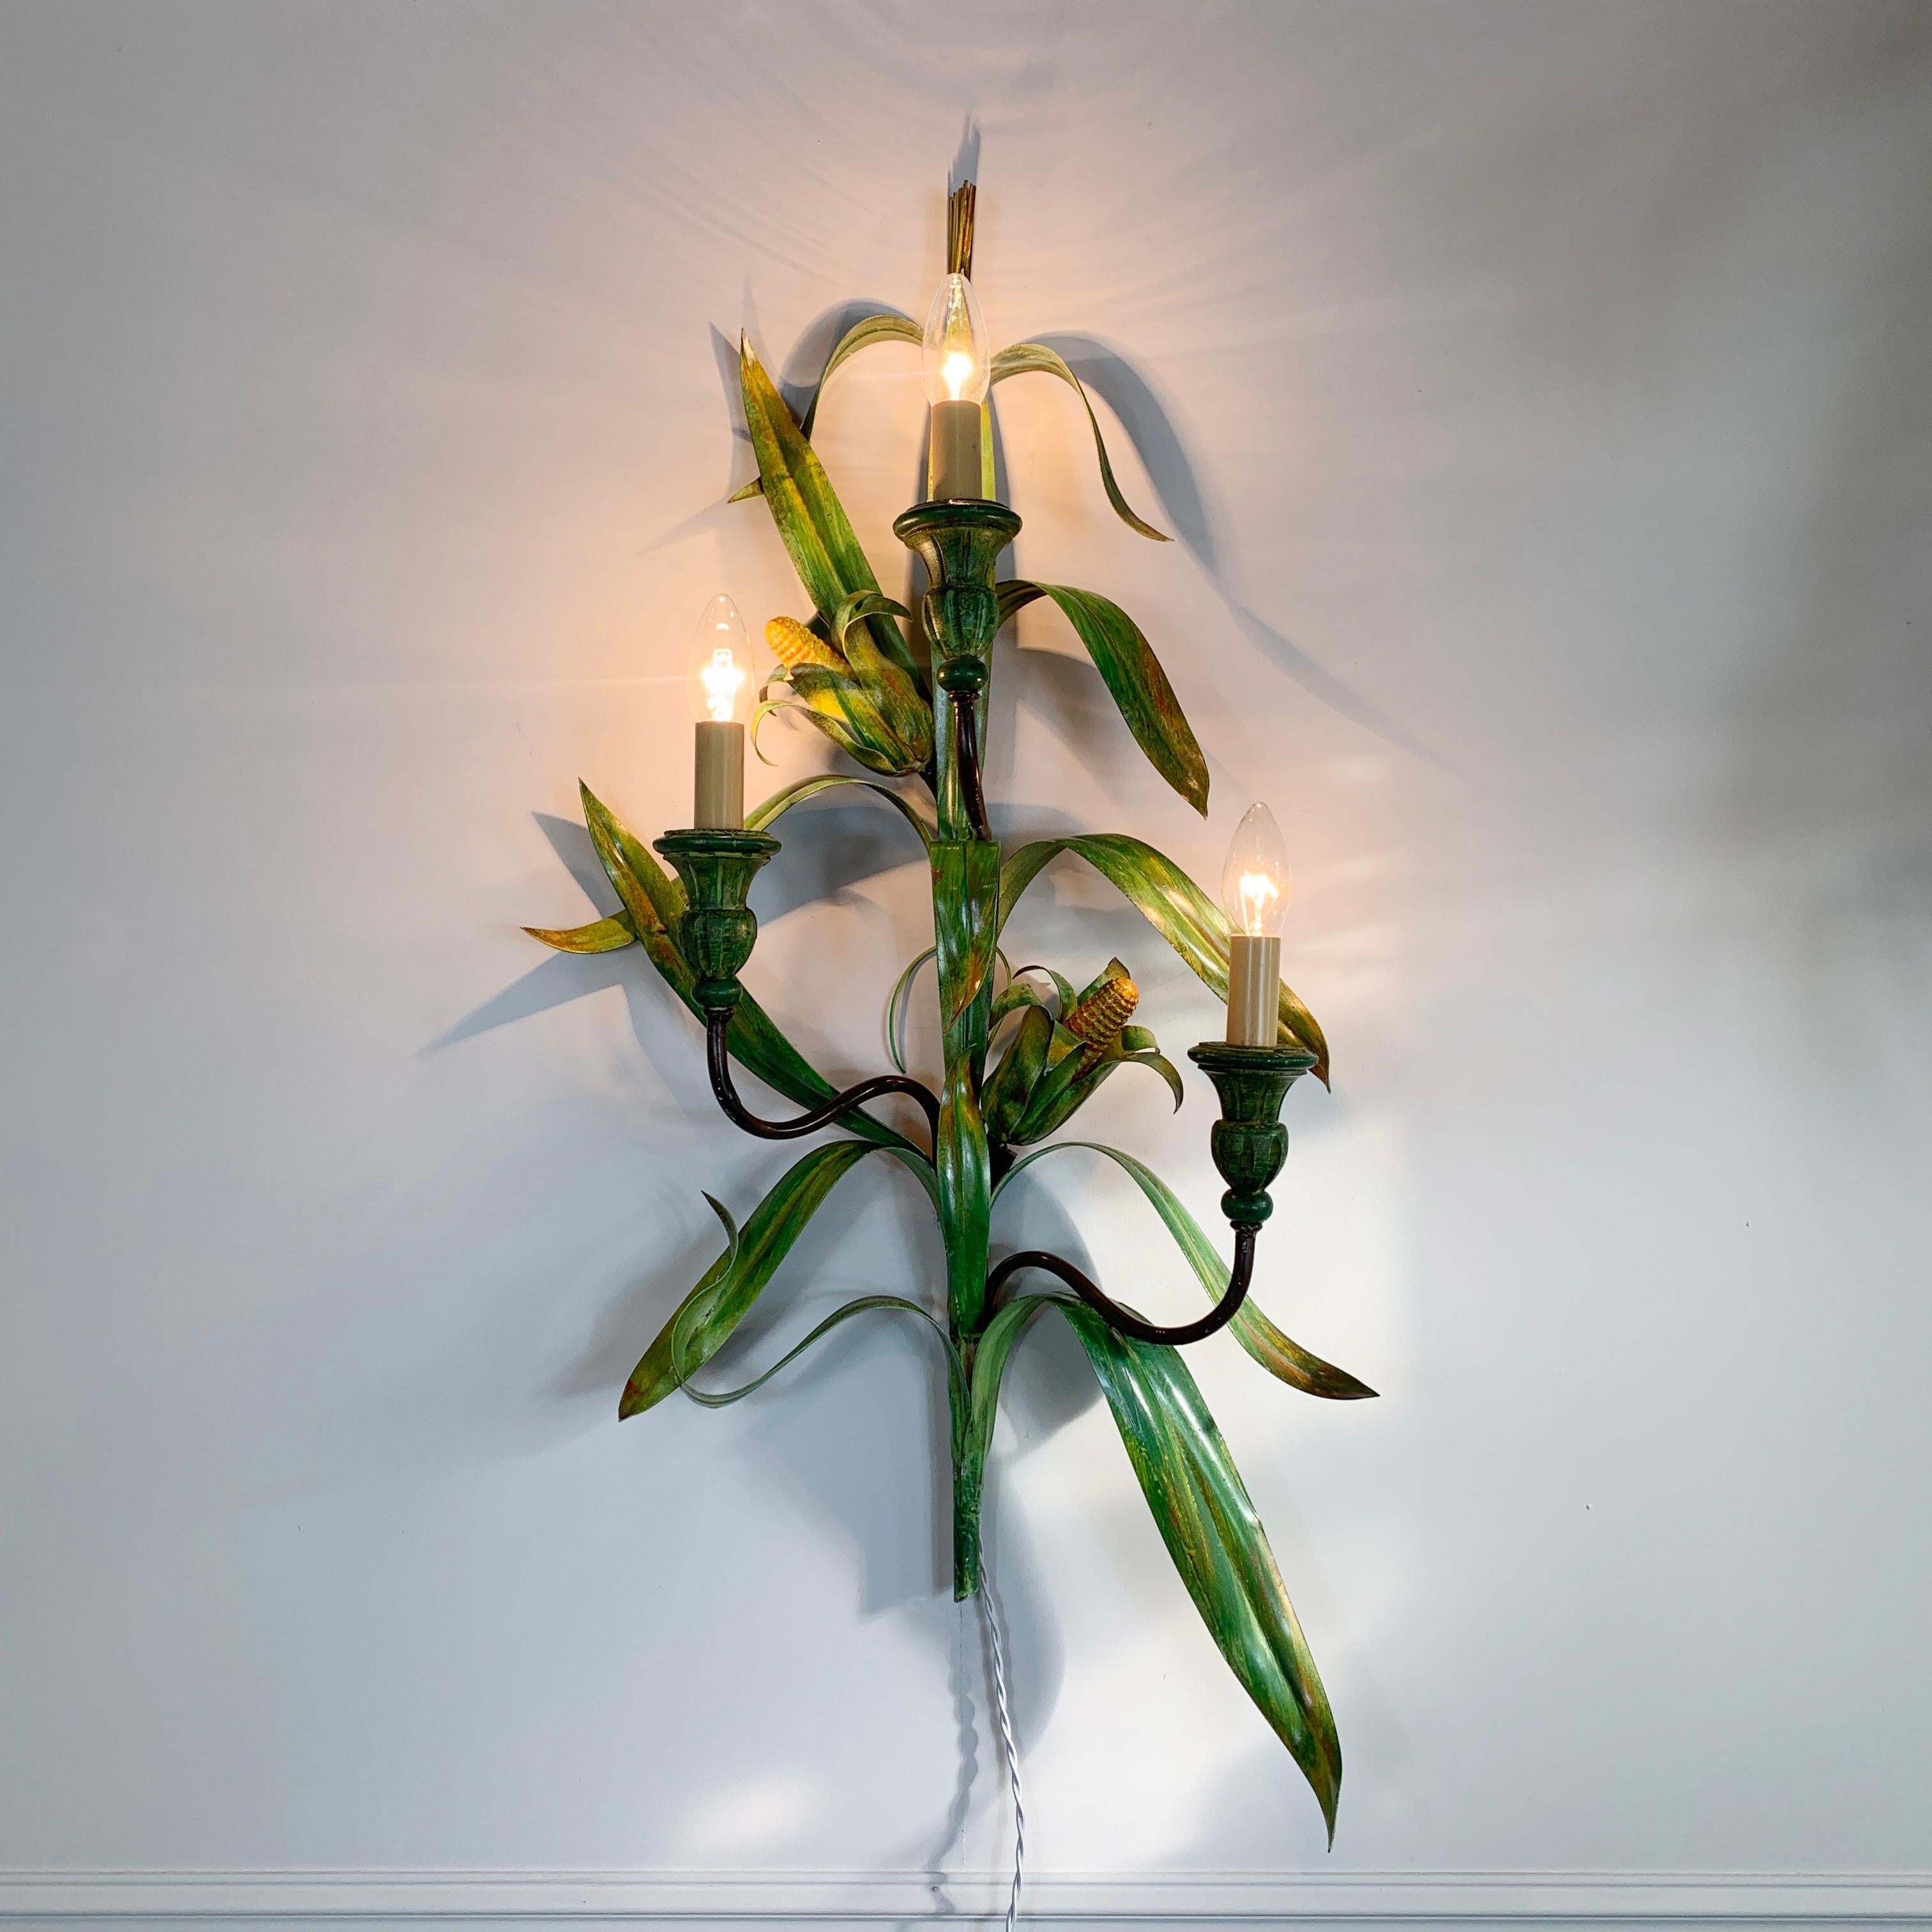 A rare & very large painted tole wall light in the design of maize stem with corn cobs and leaves, tipped with maize seed heads

Measures: 90cm height, 50cm width, 17cm depth

There are 3 lampholders which take e14 bulbs

Original loop hook to